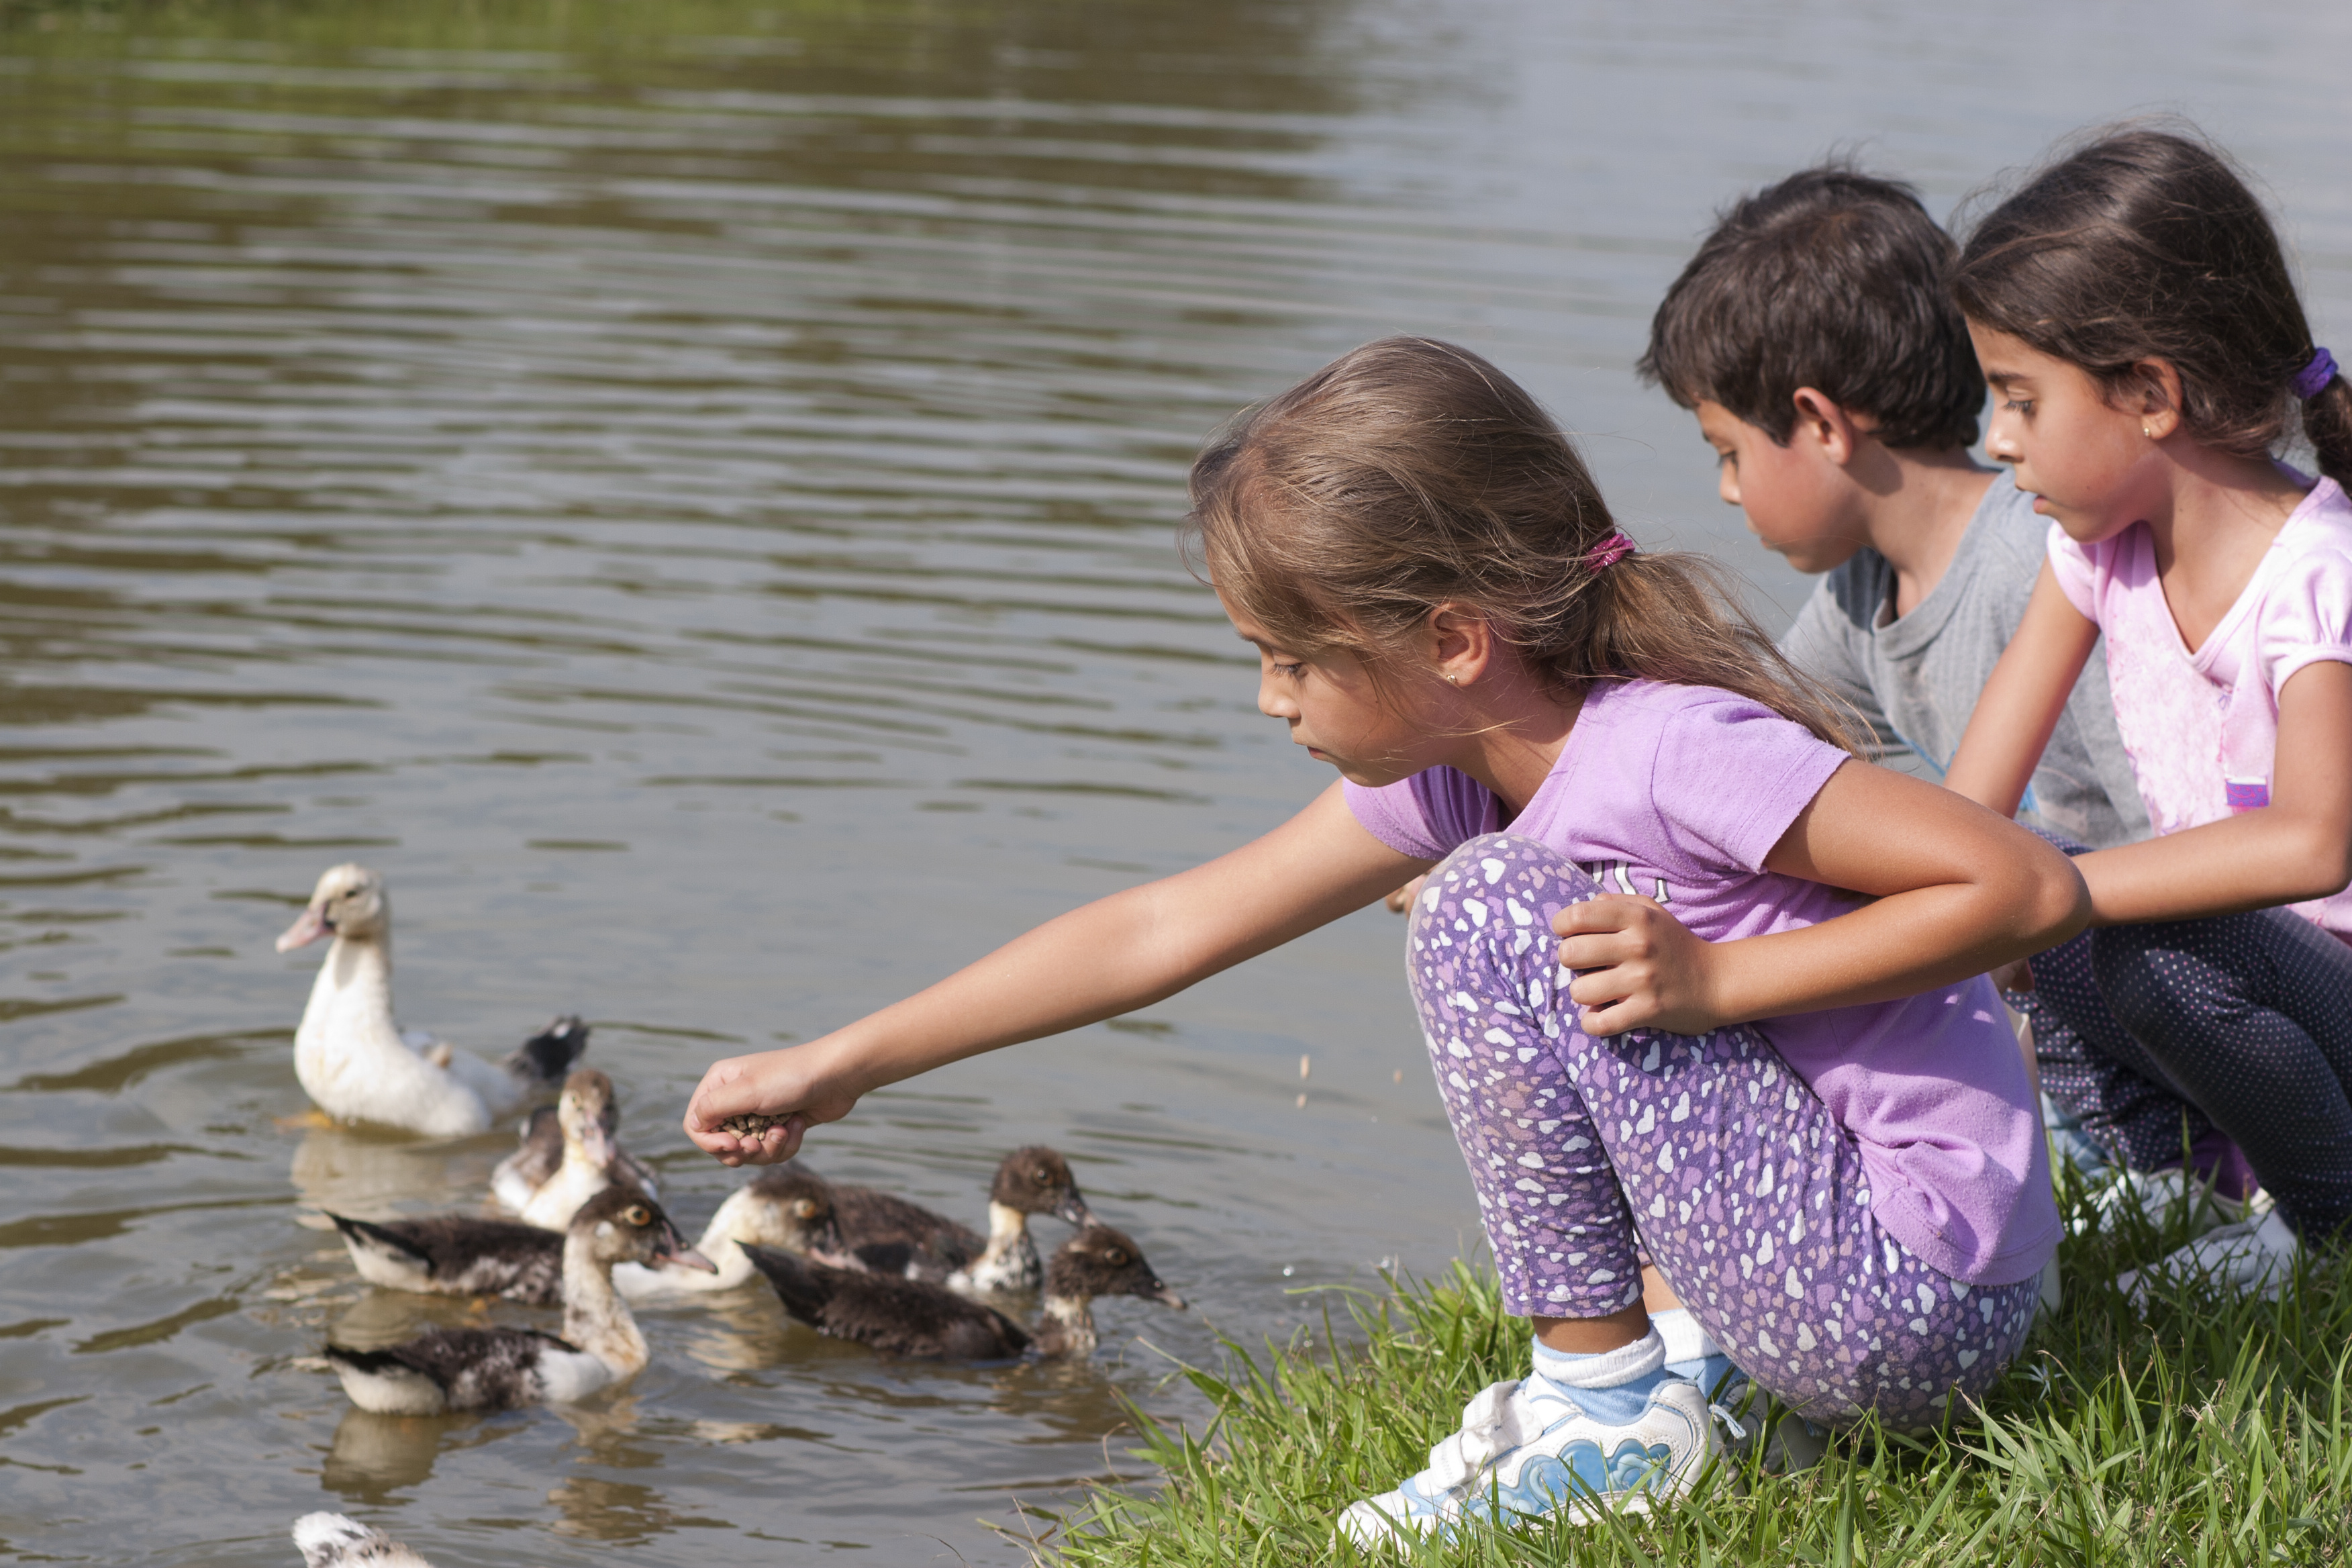 Do You & Your Young Children Or Grandchildren Love To Feed The Ducks?